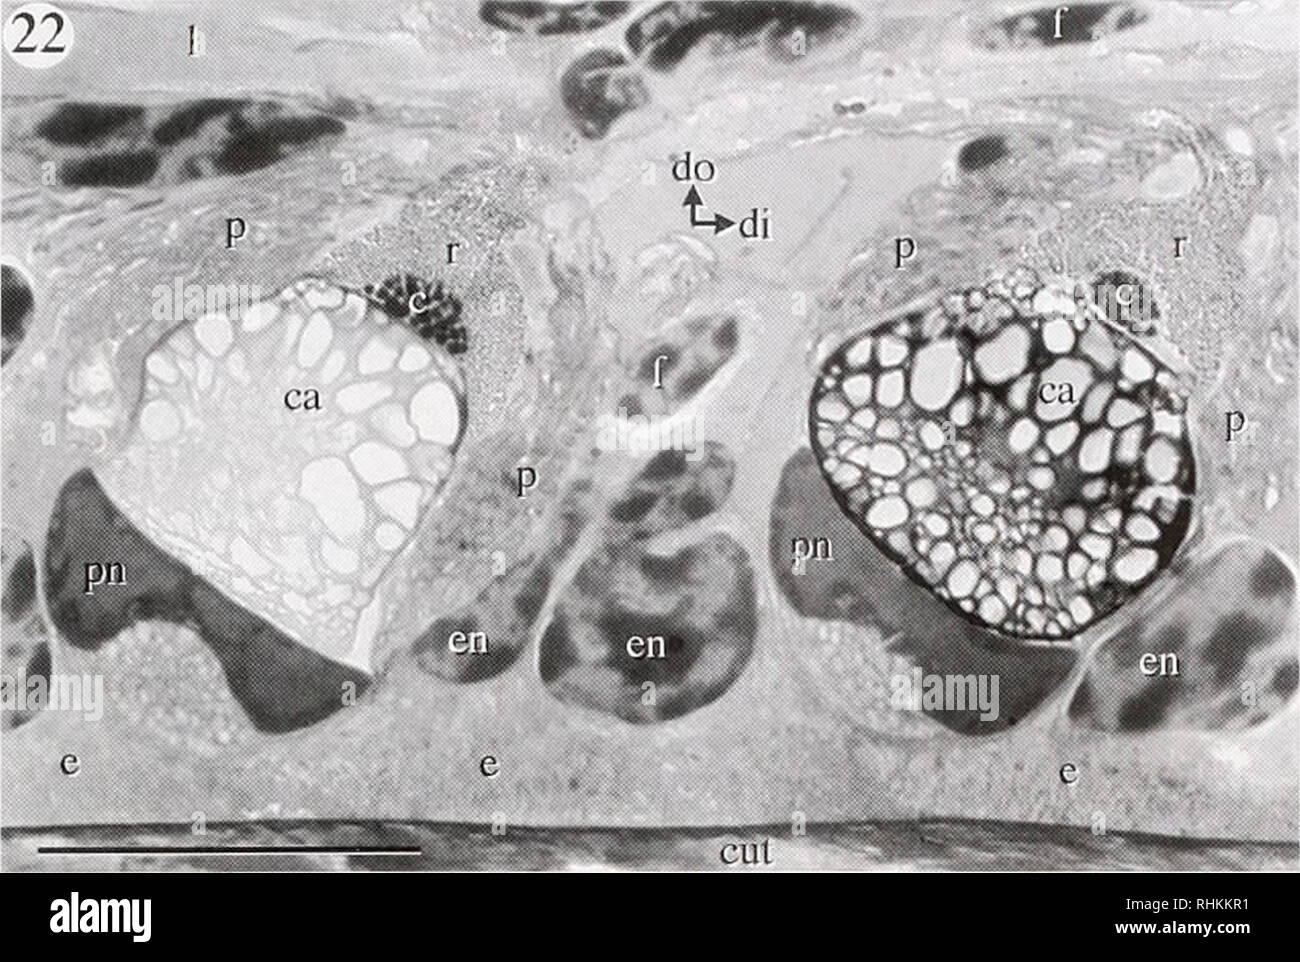 . The Biological bulletin. Biology; Zoology; Biology; Marine Biology. DECAPOD CRUSTACEAN PHOTOPHORES 299. Figure 22. Light micrograph of a longitudinal section through the maxilliped of Oplophorus x/iinosHx showing photophores in which the &quot;clear areas&quot; (ca) of the photocytes exhibit stages of increasing osmiophi- lia. c, paracrystalline bodies; cut. surface cuticle; di, distal; do, dorsal; e, &quot;window&quot; epidermis cytoplasm; en. &quot;window&quot; epidermis nucleus; f, fibroblast; 1, ligament; p. carotenoid pigment cell processes; pn. photocyte nuclei; r. reflector pigment ce Stock Photo